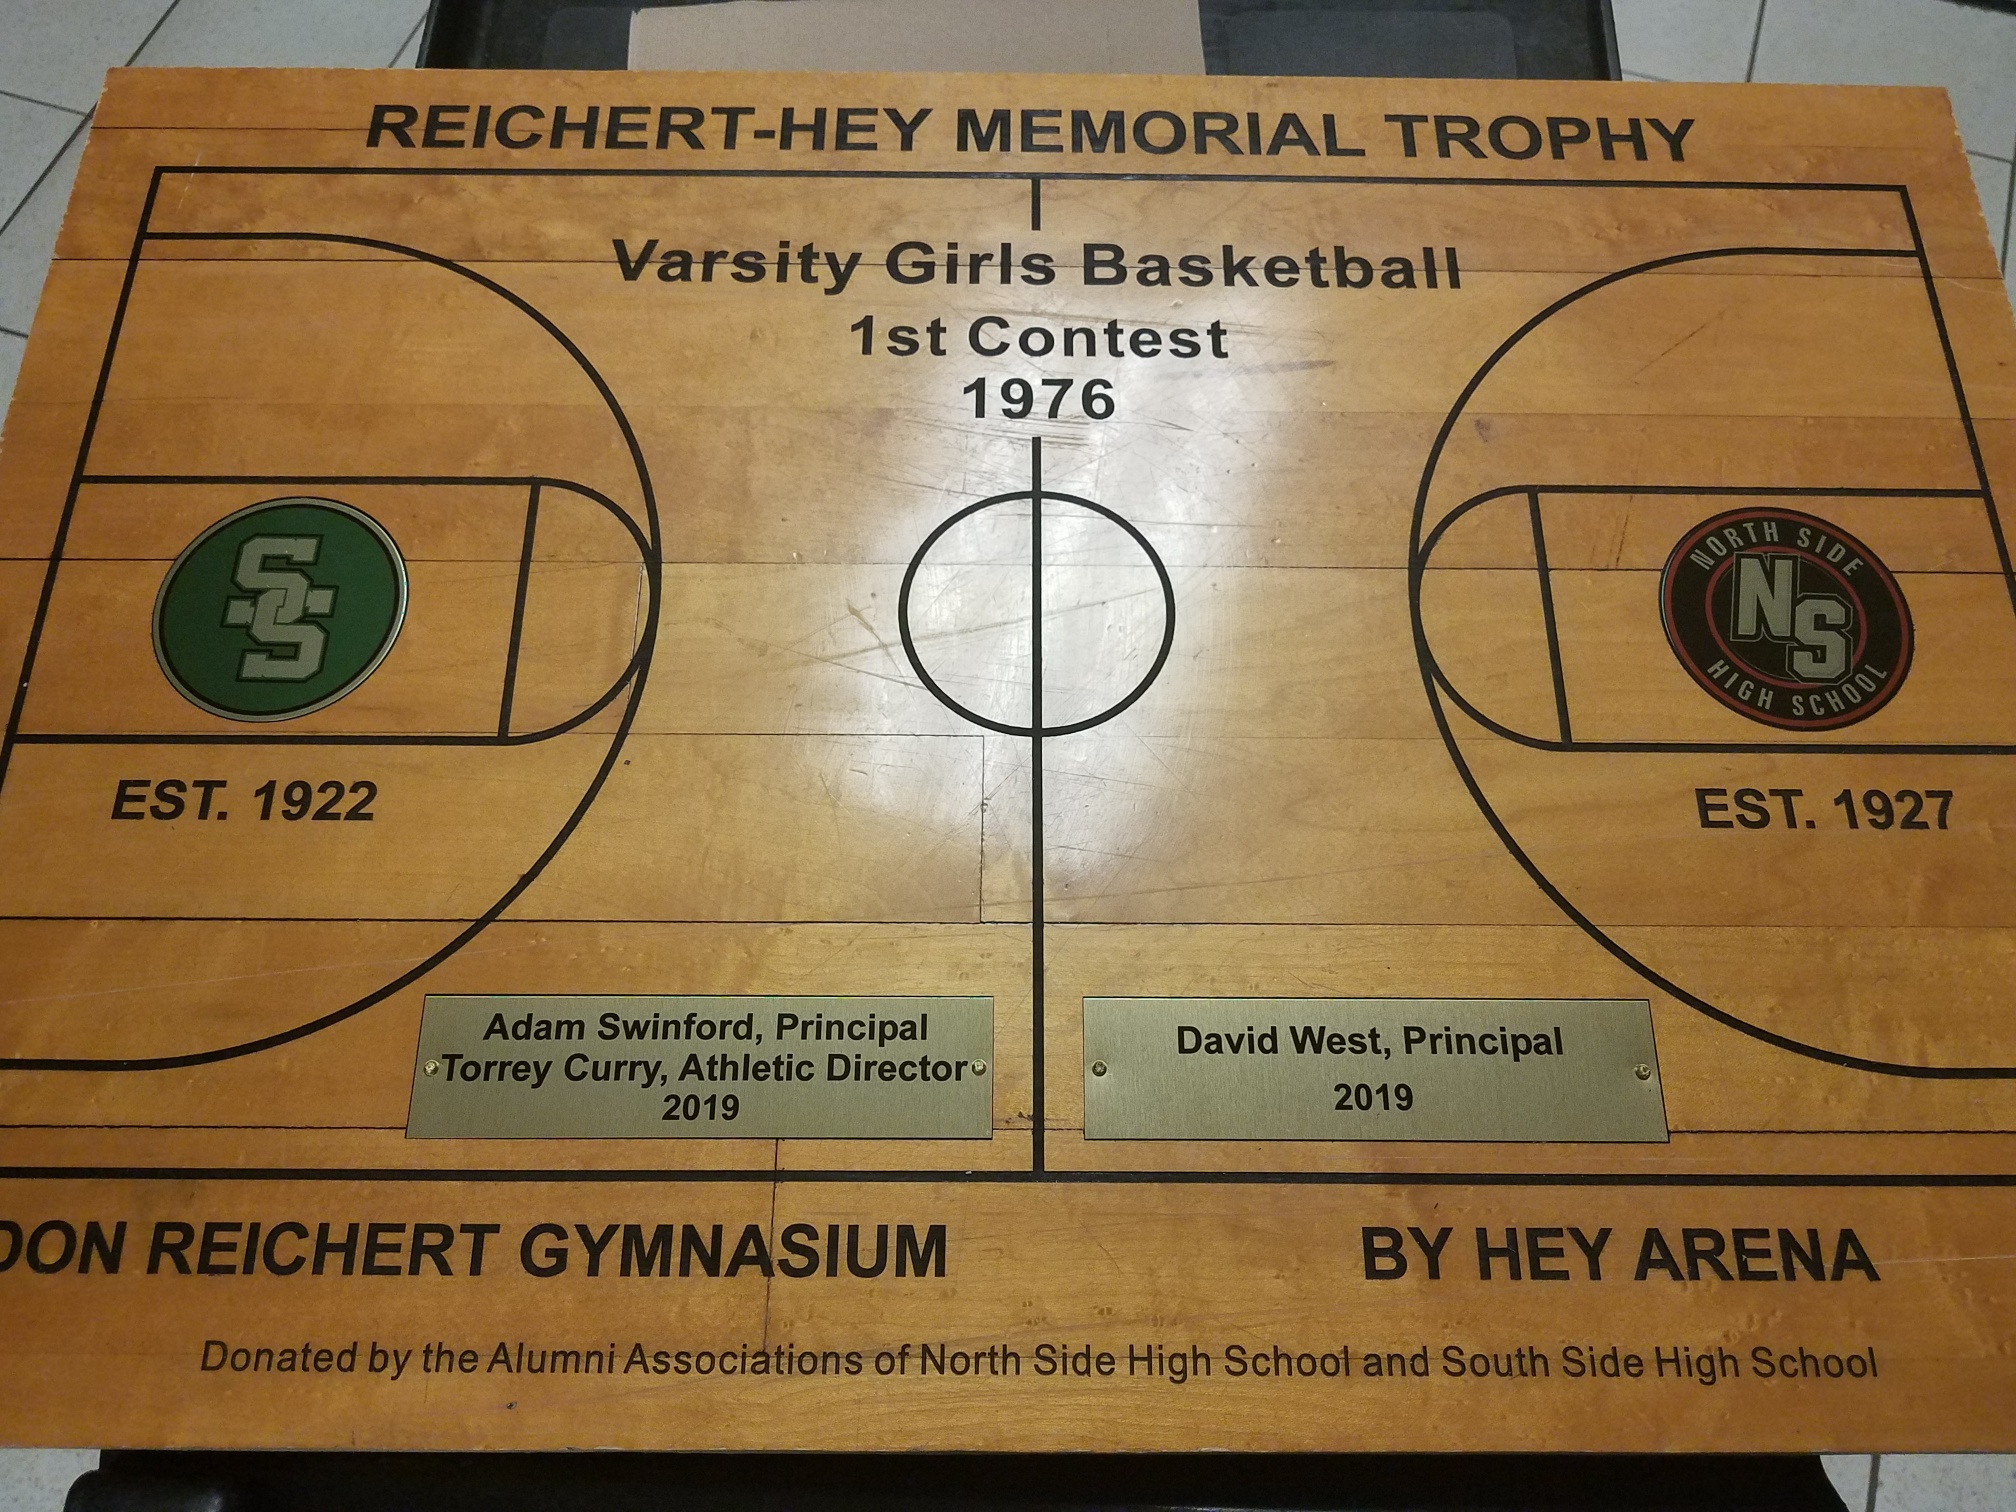 Reichert-Hey Memorial Trophy adds new stakes to South Side/North Side rivalry